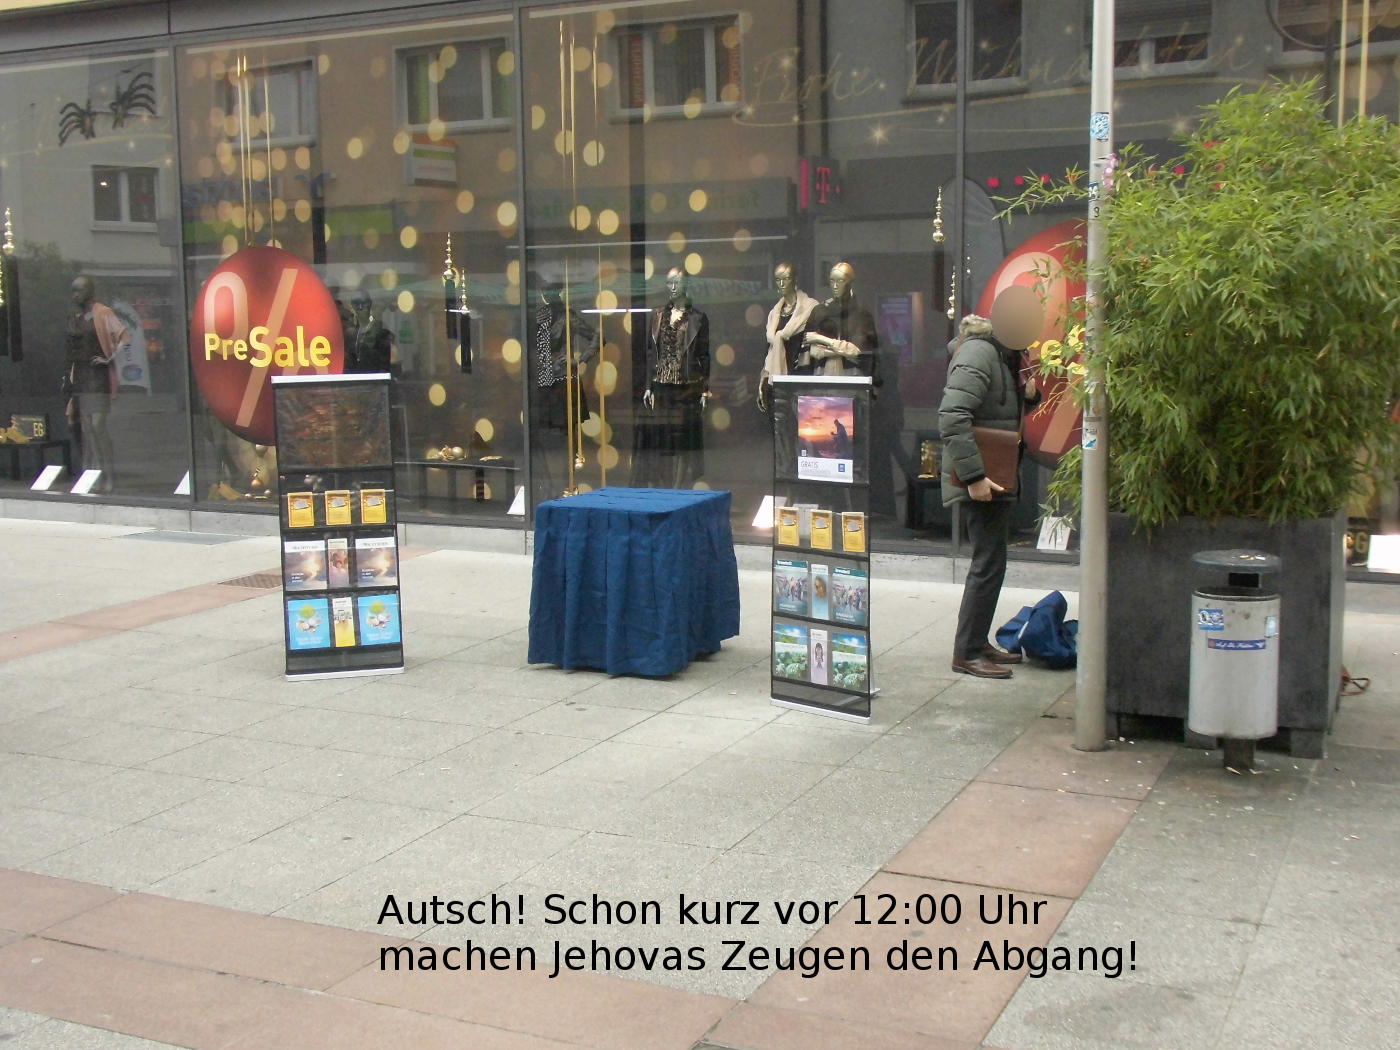 Jehovah's Witnesses in Bruchsal do not drink human blood